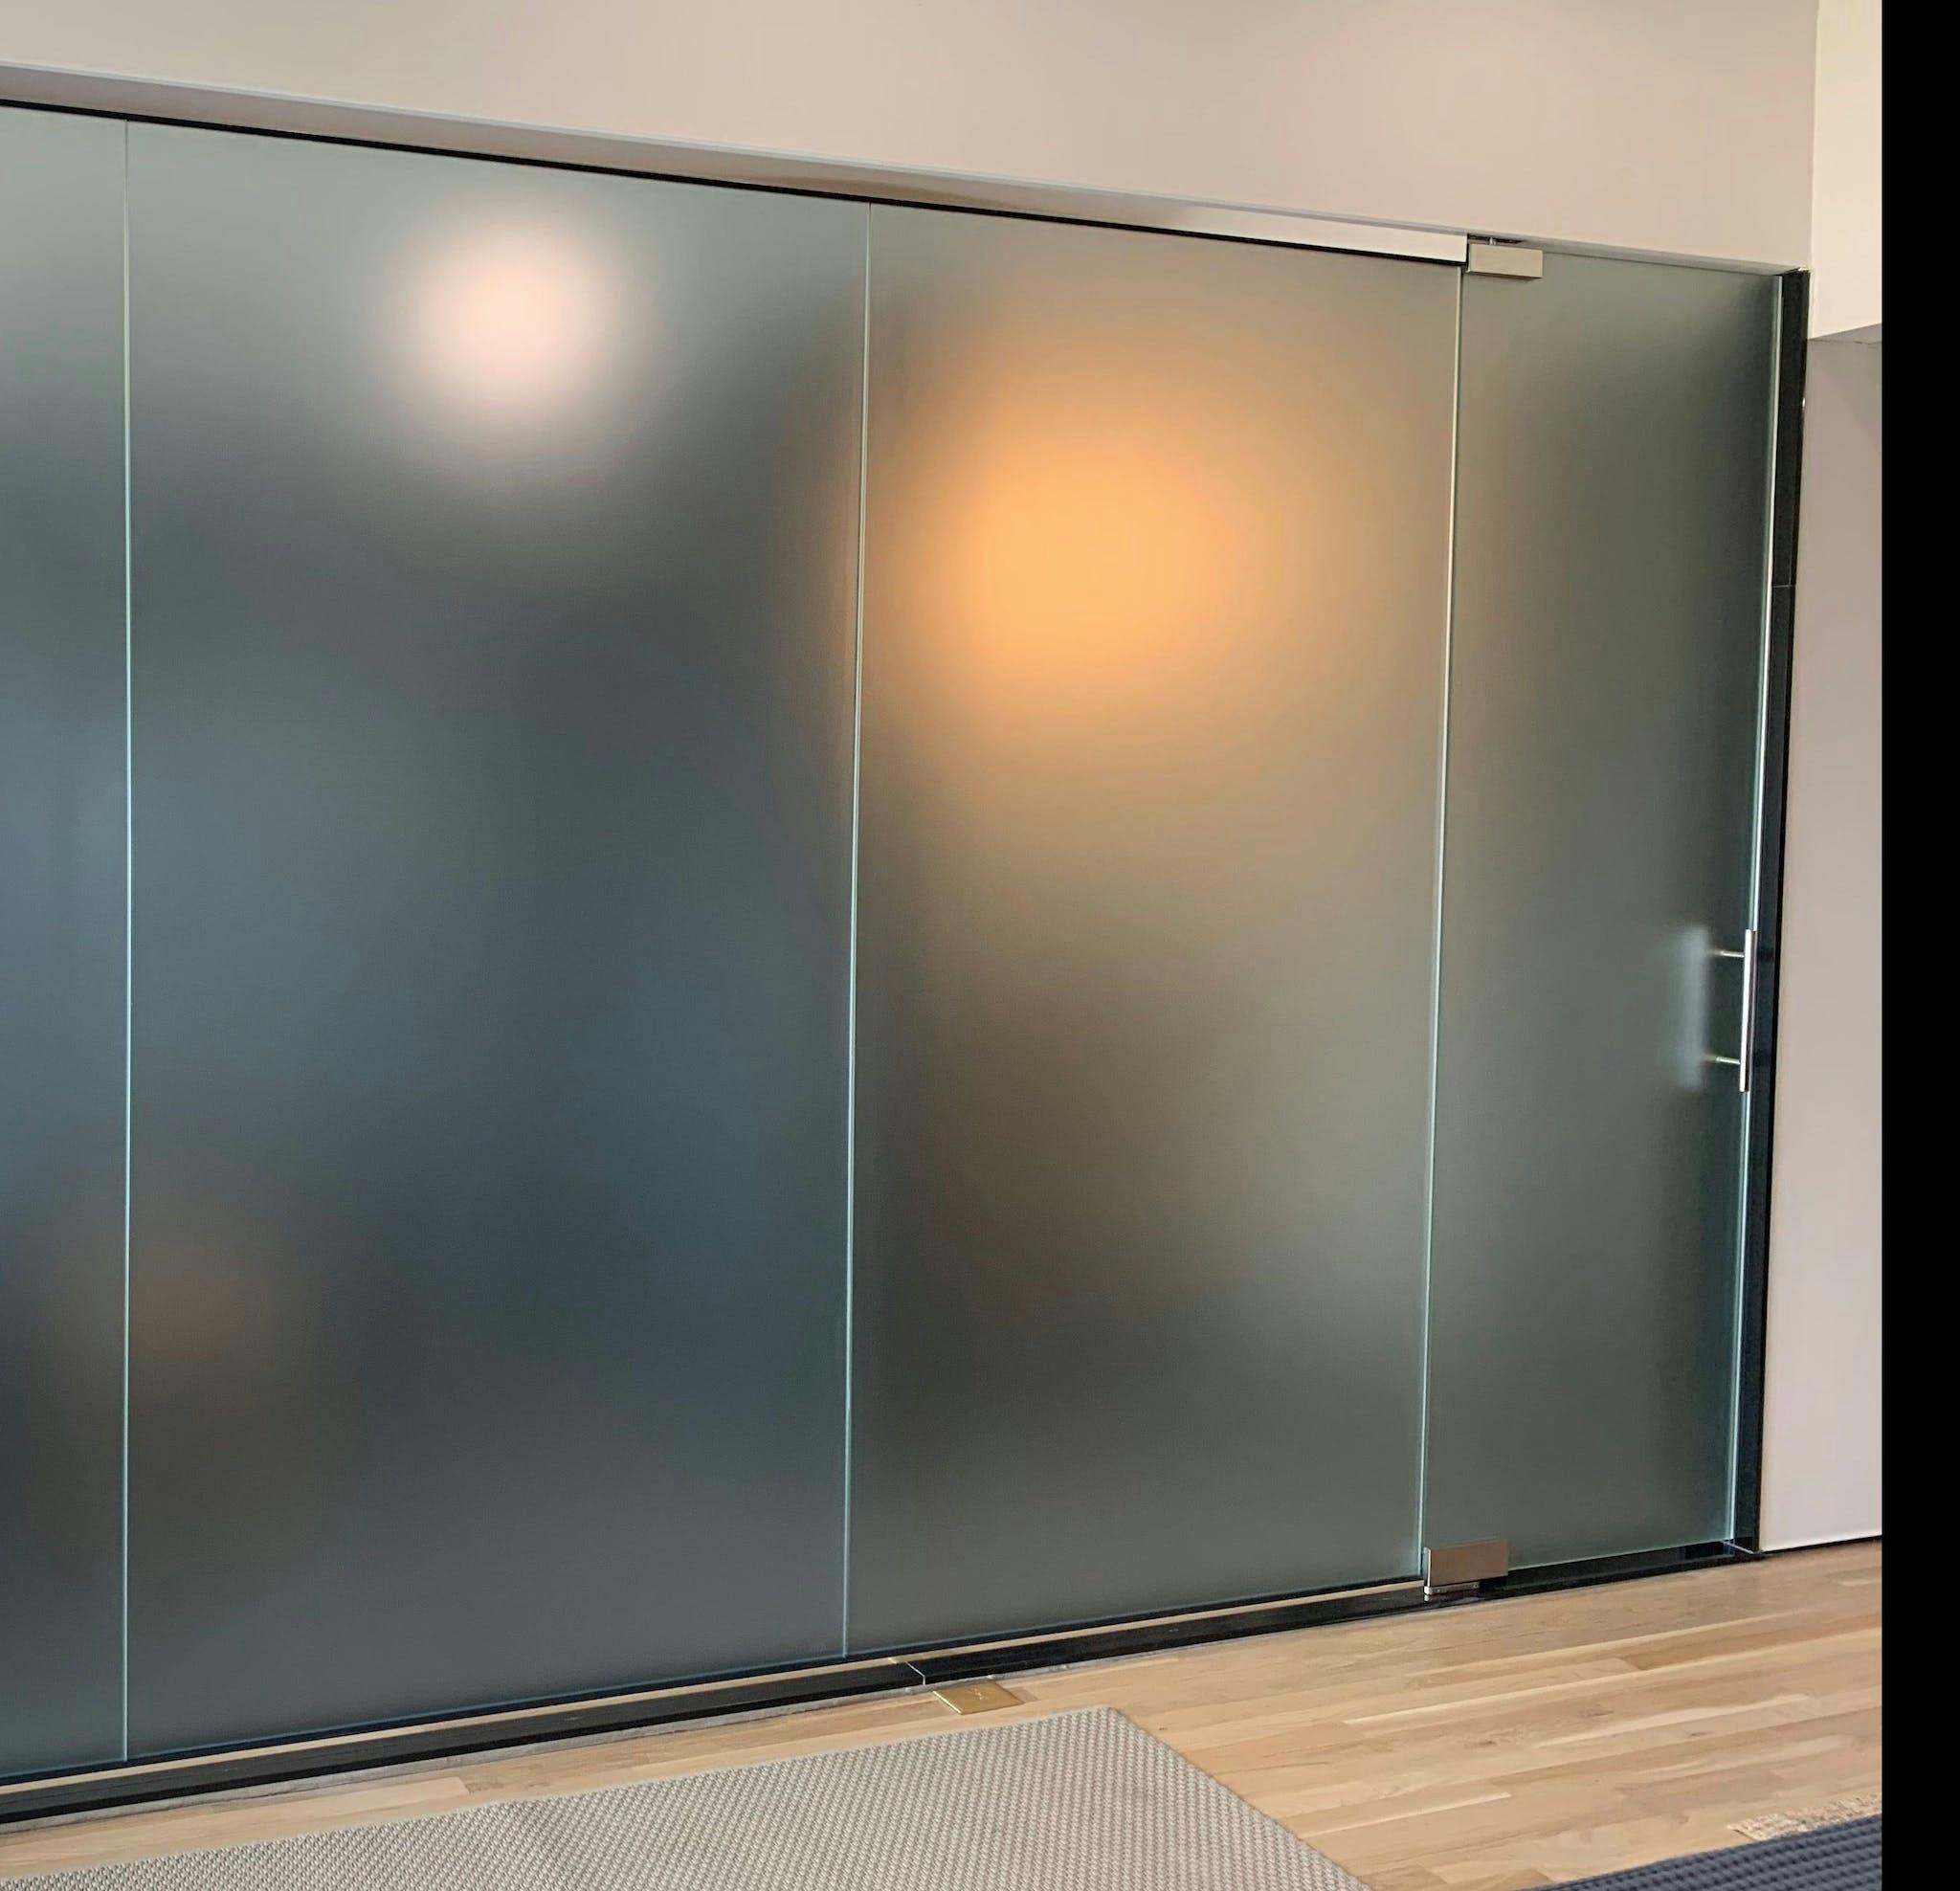 Opaque glass sliding doors, potentially in an office setting